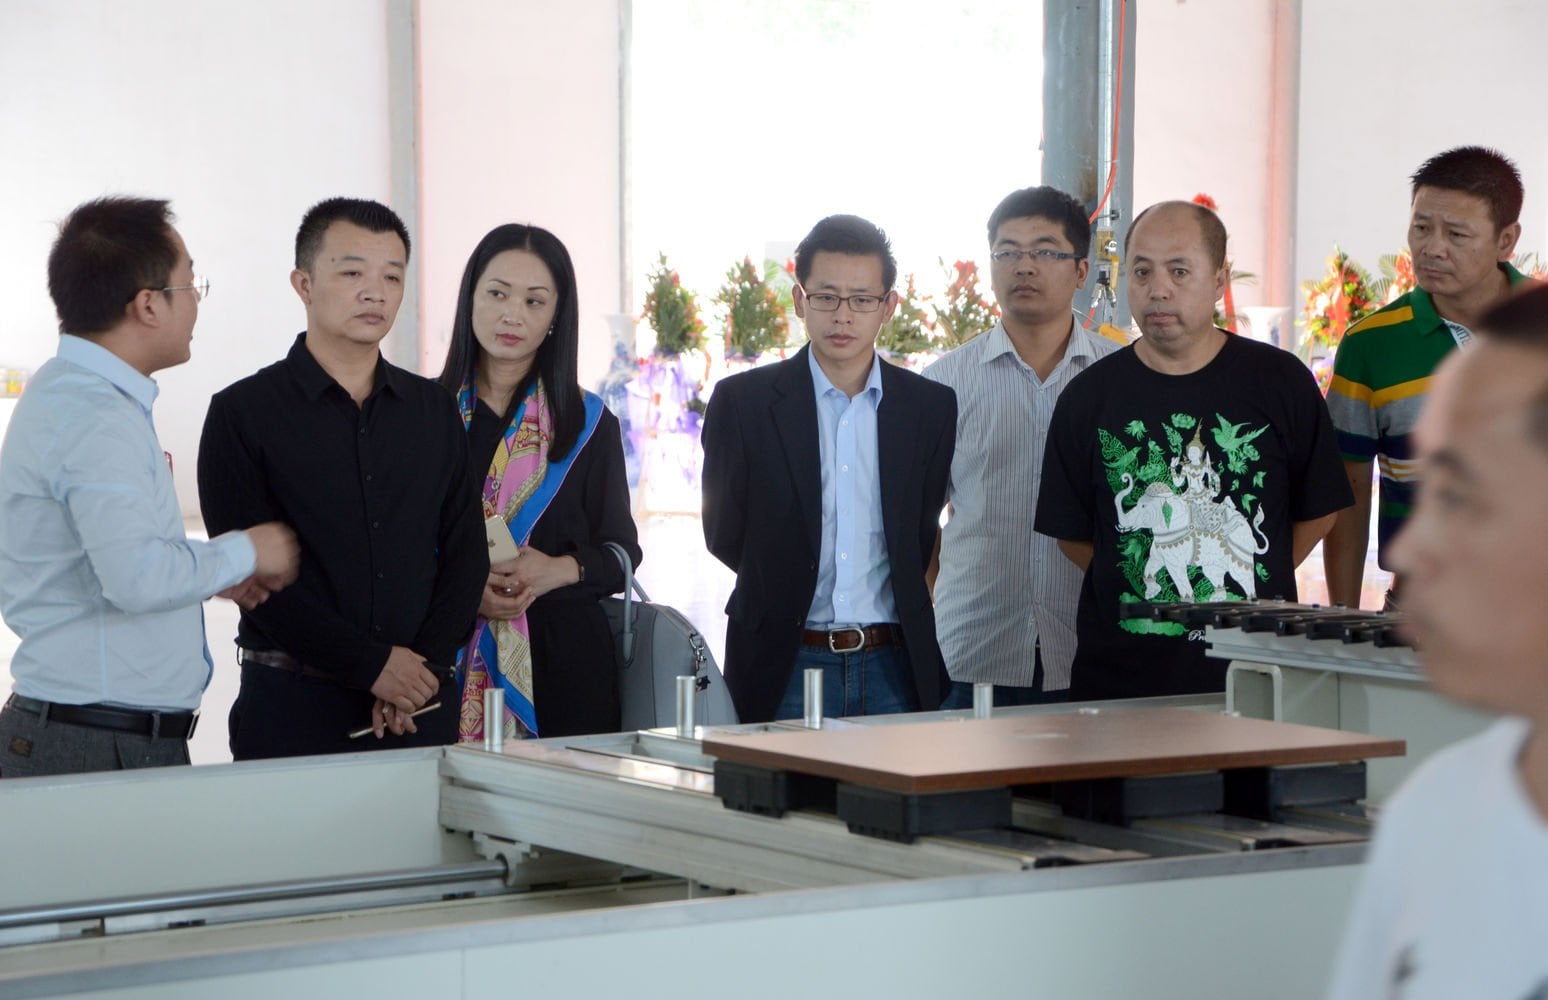 Successful opening ceremony of panel furniture cloud intelligent factory in China.